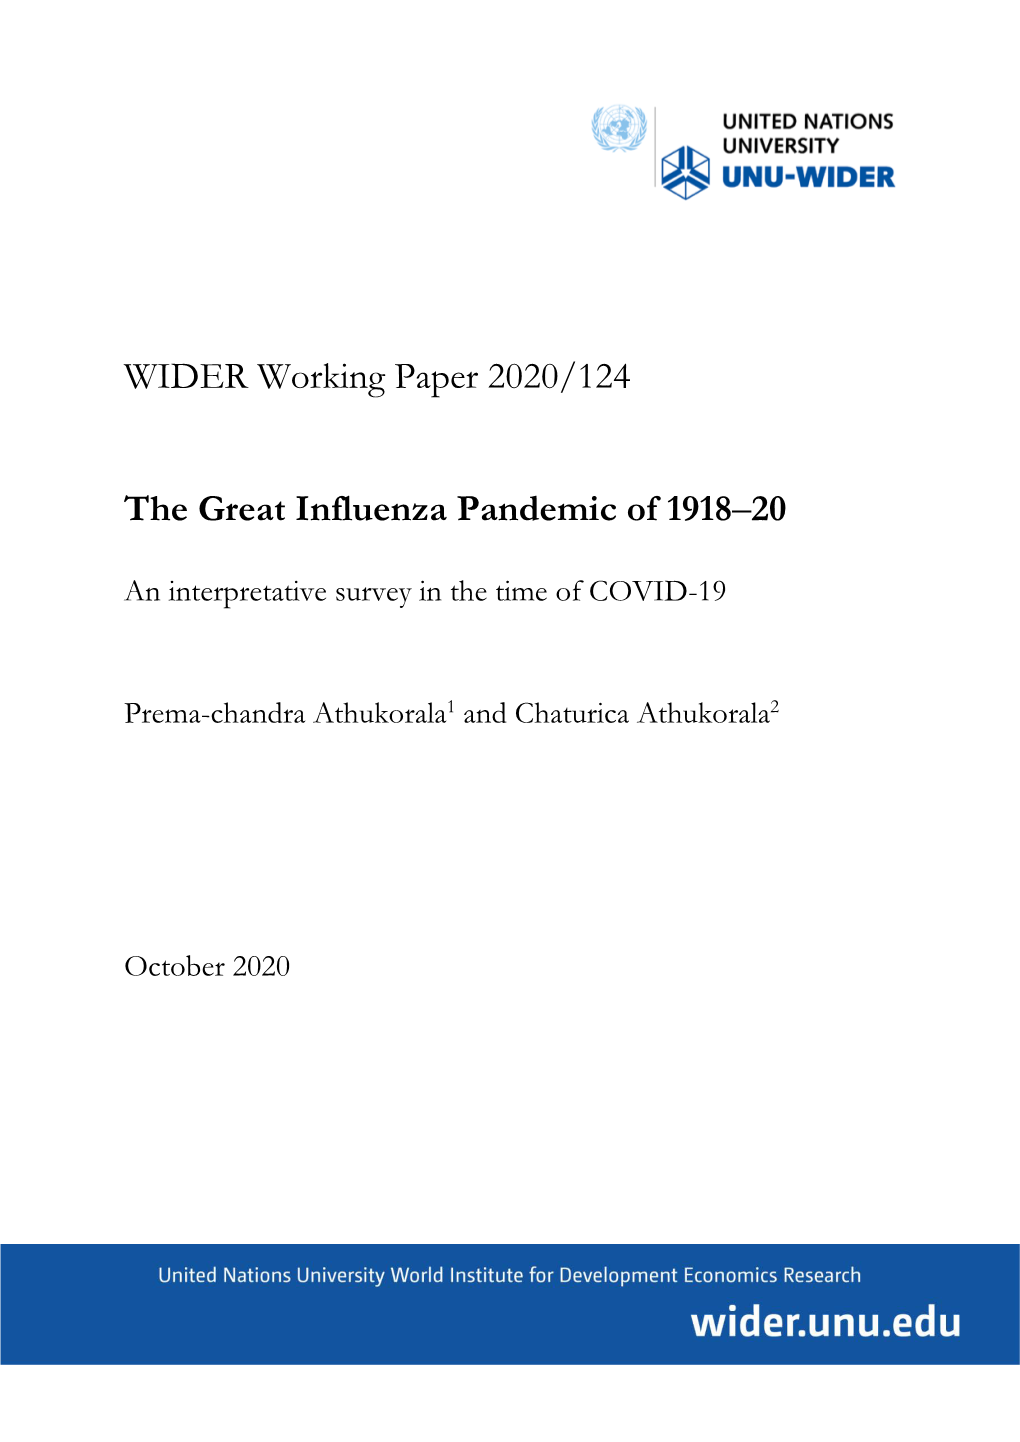 WIDER Working Paper 2020/124-The Great Influenza Pandemic of 1918